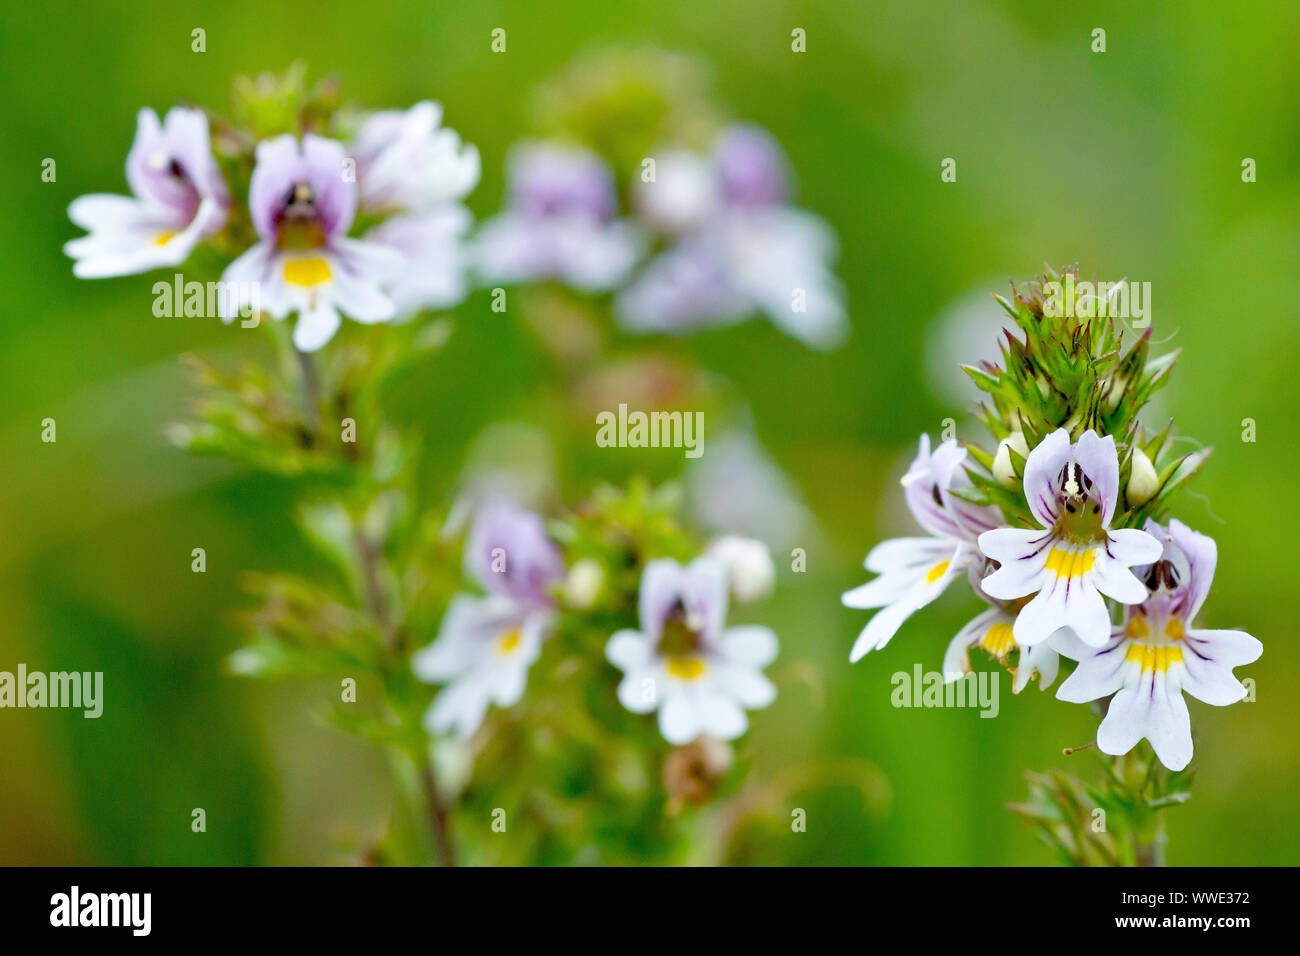 Eyebright (euphrasia officinalis), close up showing detail of the small white flowers. Stock Photo